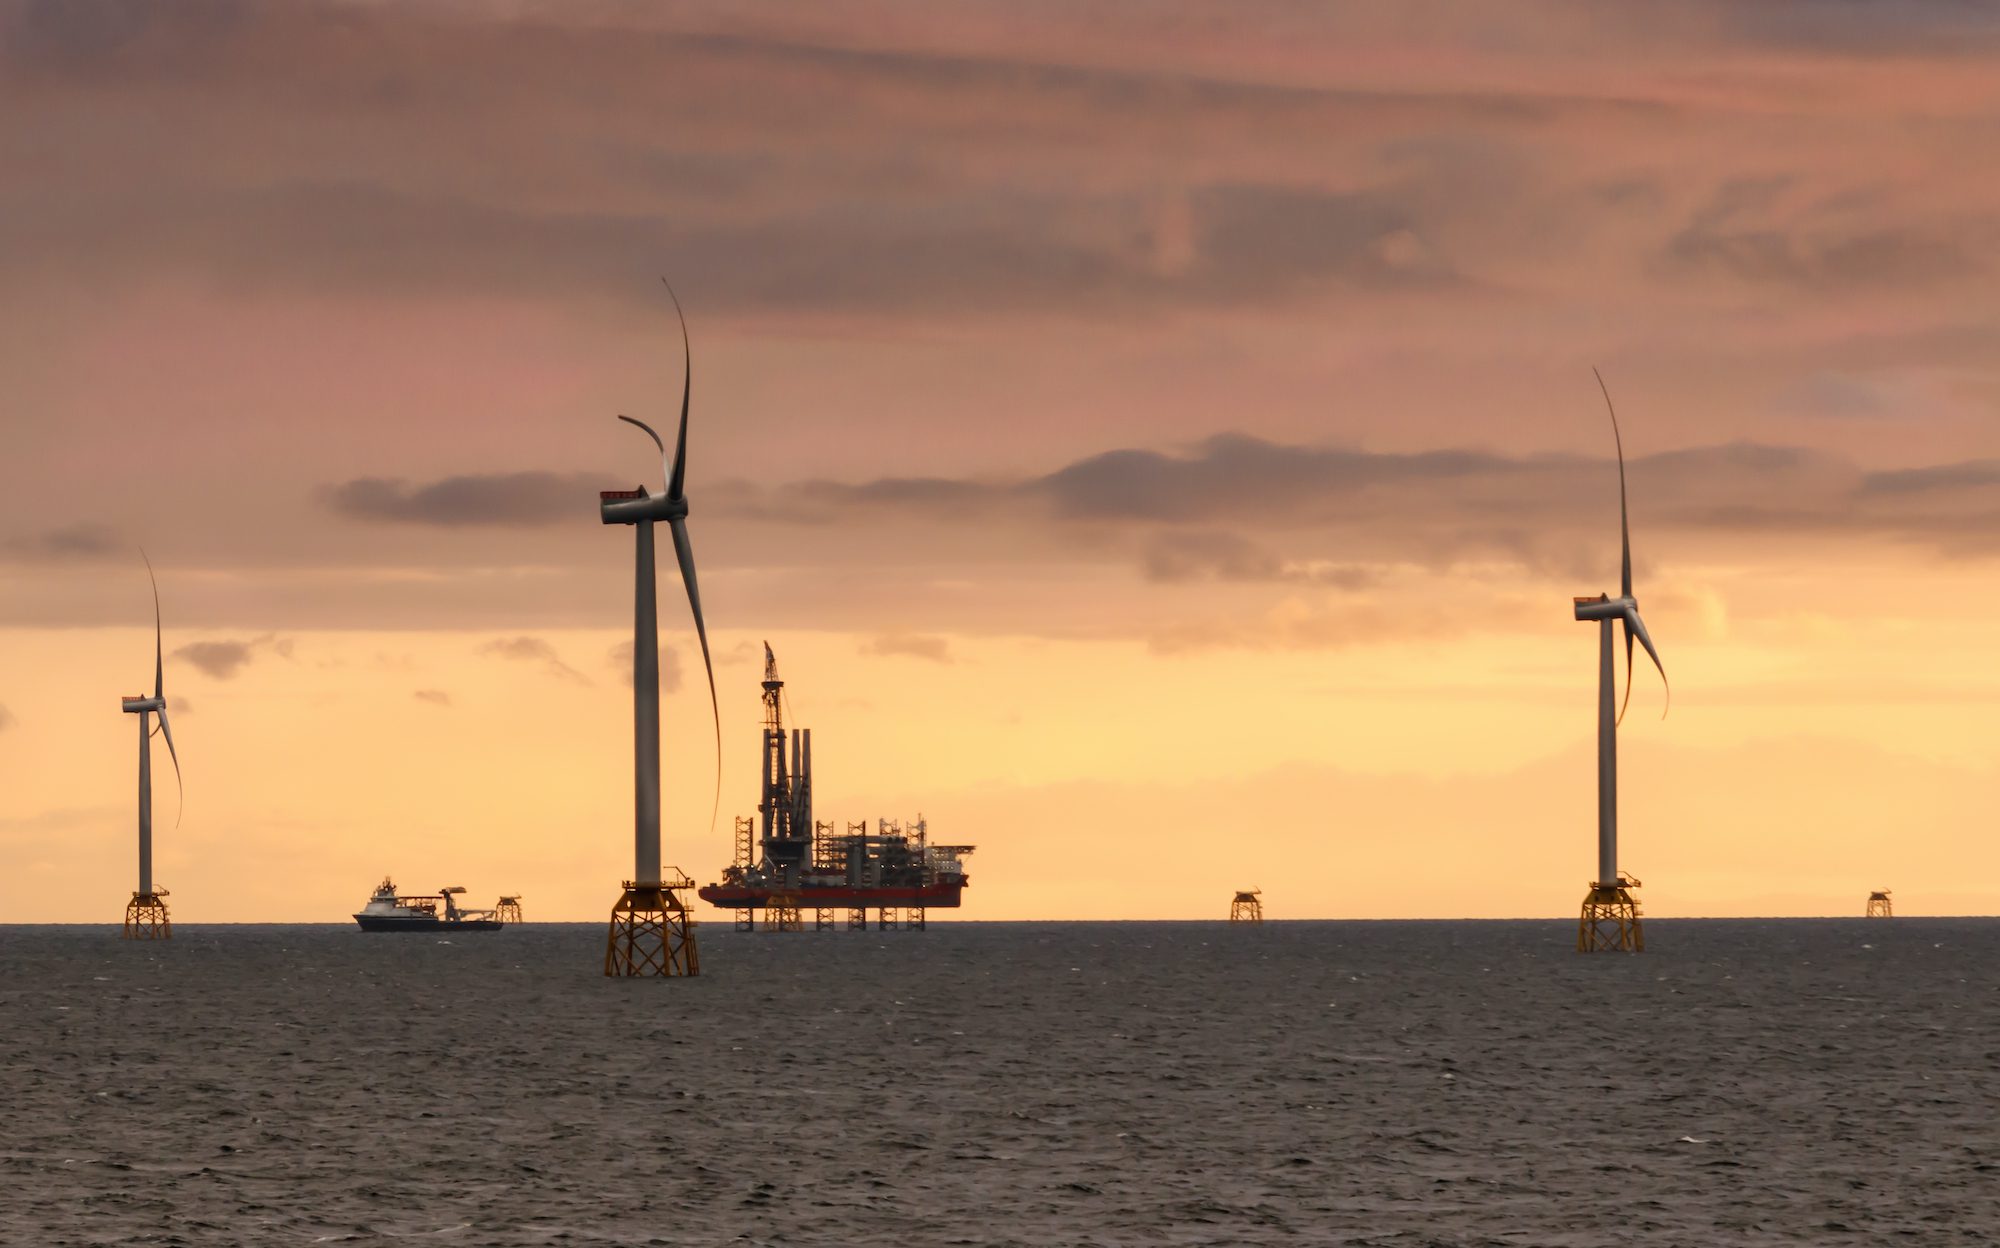 A stock photo of a vessel servicing an offshore wind farm at sunset